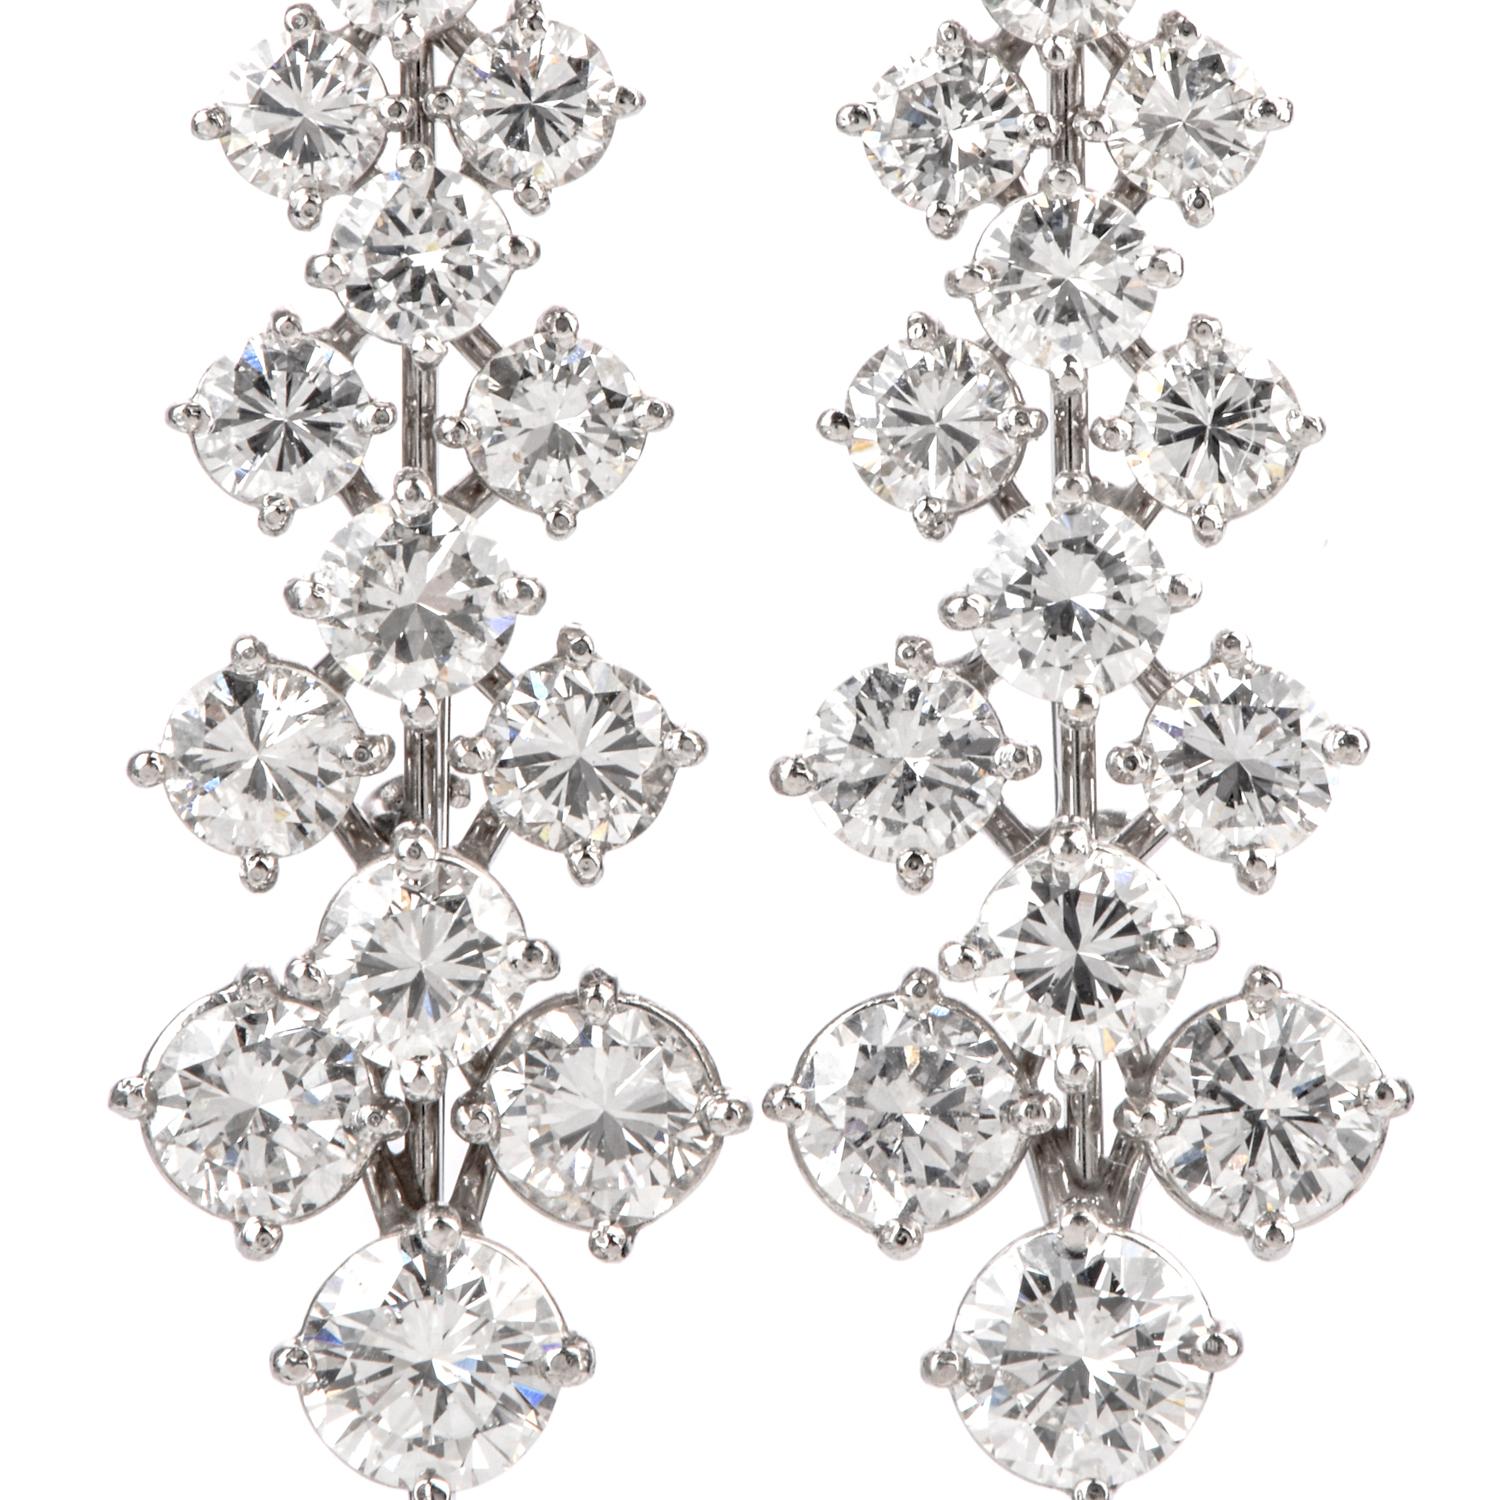 With every movement. This astonishing floral motif earrings have a small bud

at the top consisting of 5 marquise shaped diamonds.

Dangling from the flower are stems of diamonds in triplet patterns

repeating as teh diamonds are graduating in size